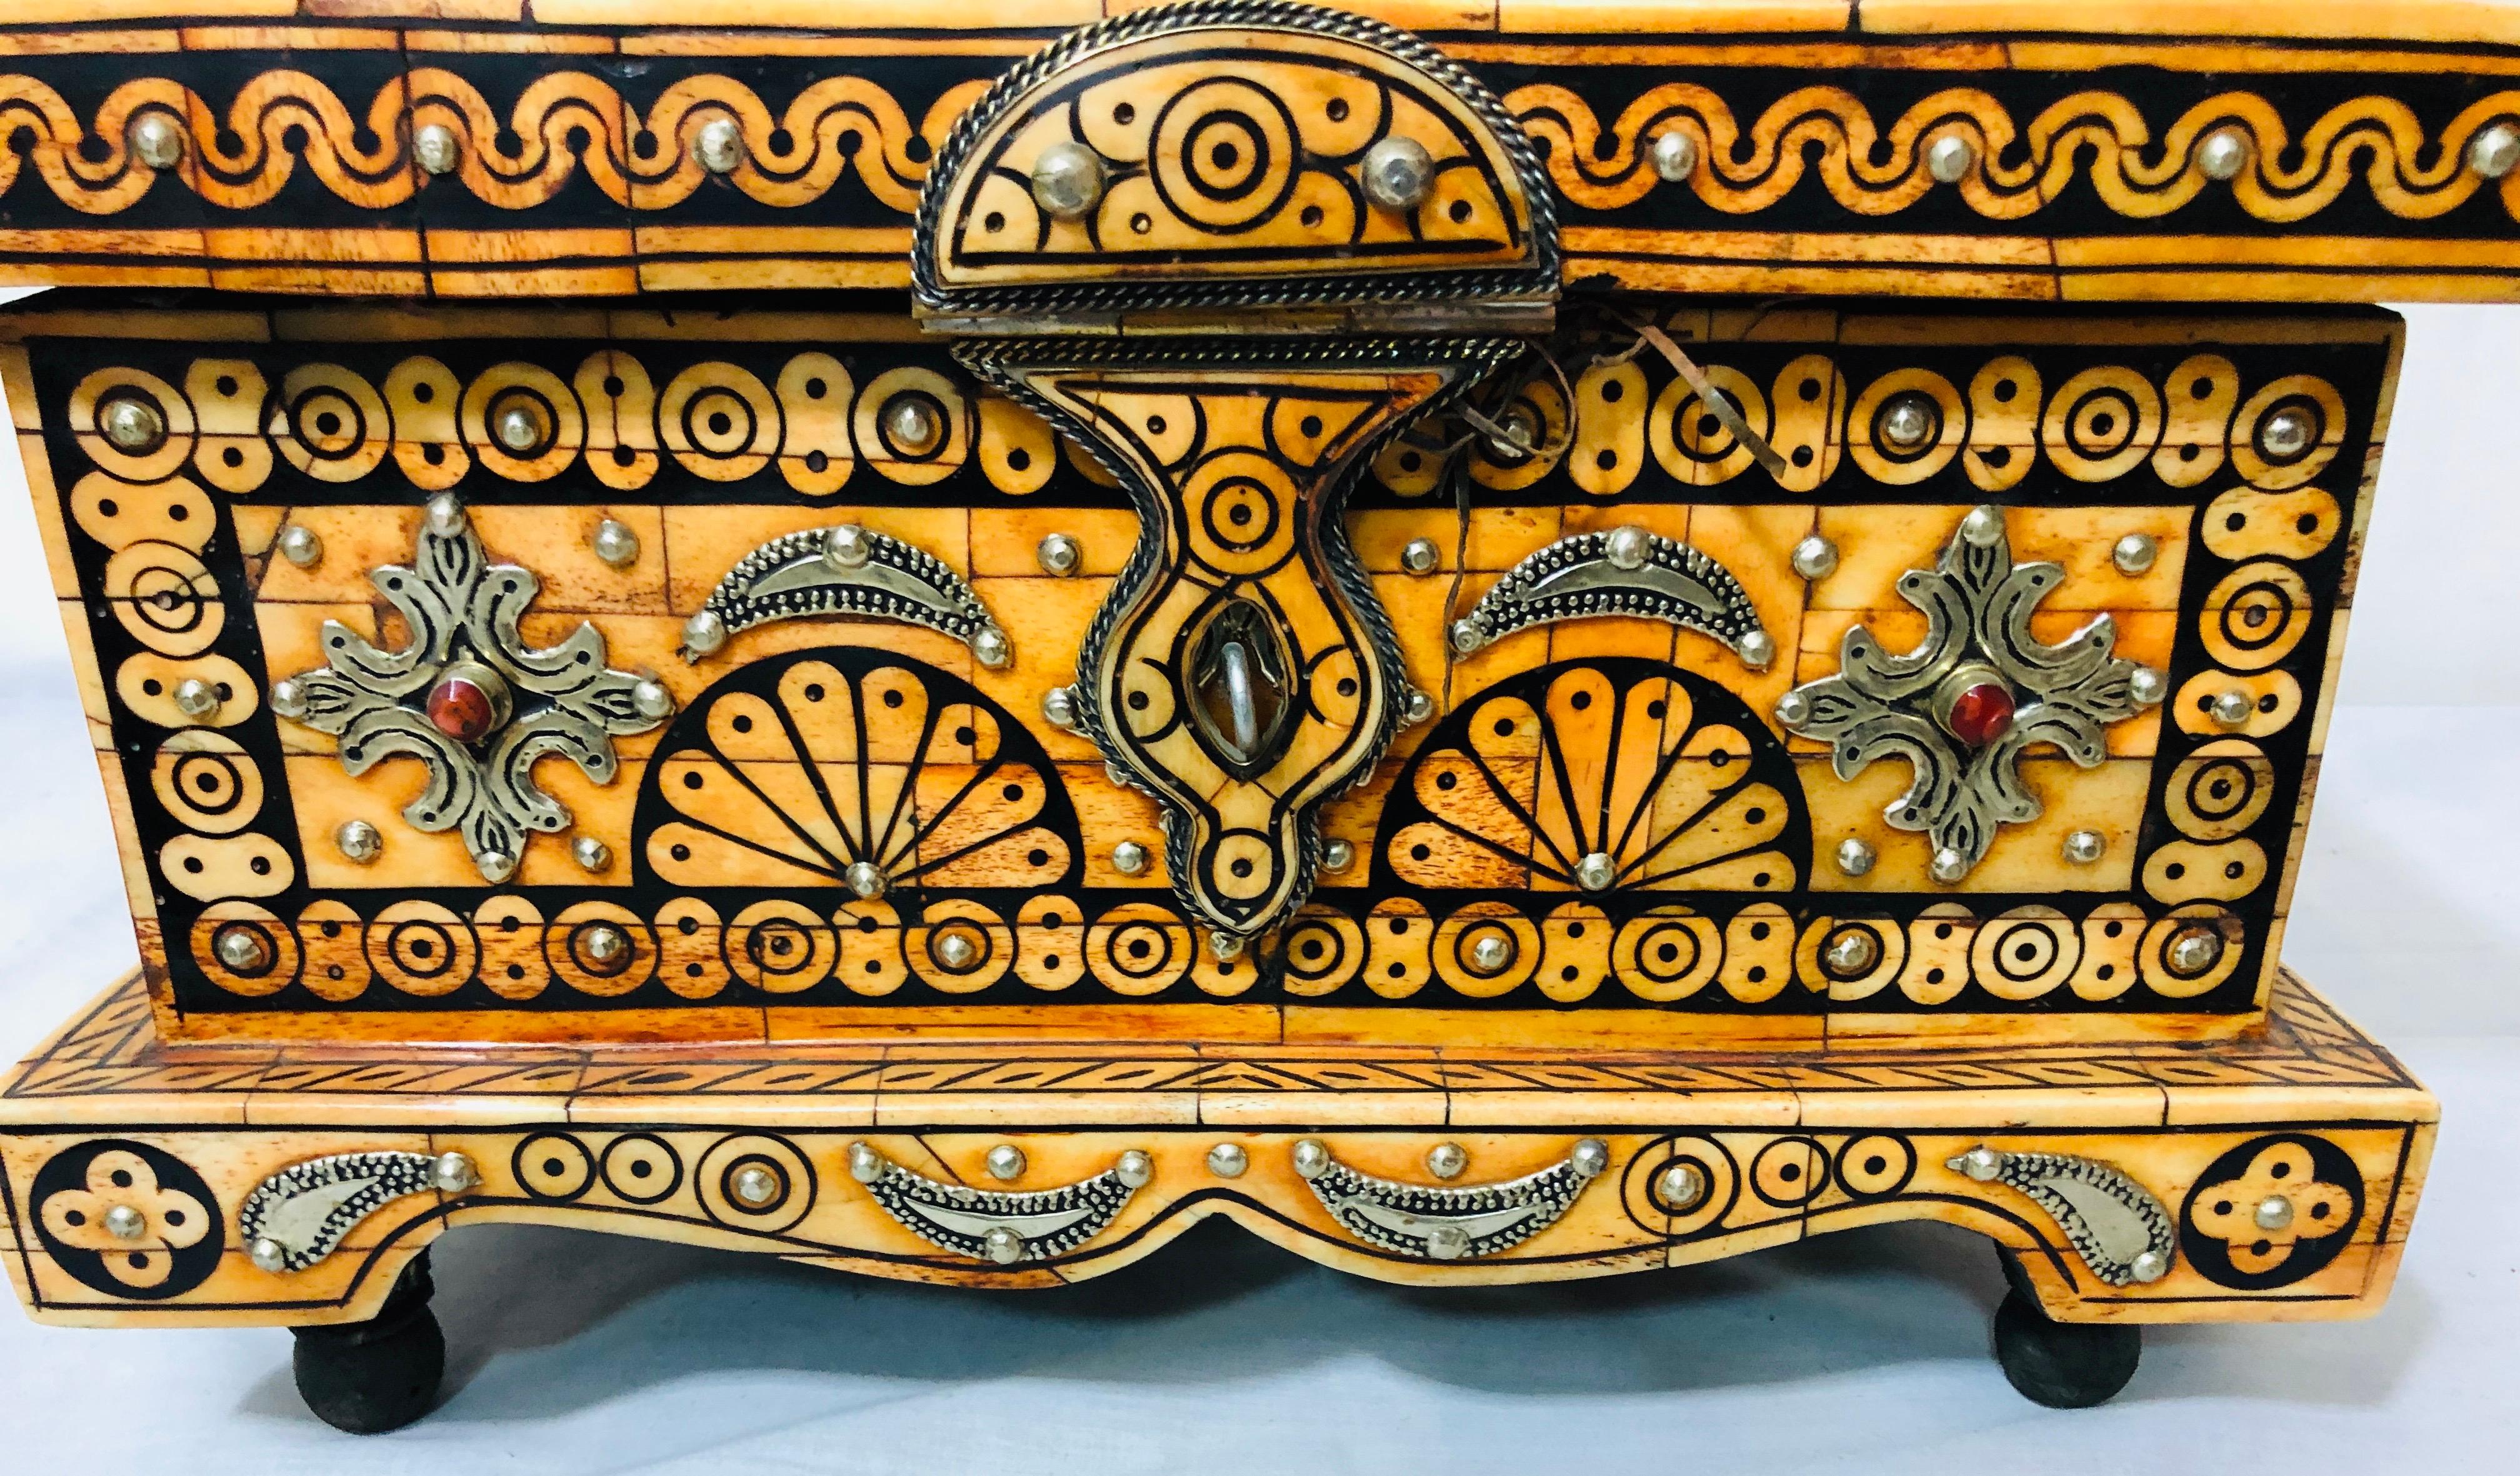 A decorative handmade orange bone and black tribal design chest or jewelry box. The chest interior is leather and features gorgeous brass inlay design with natural decorative stones.